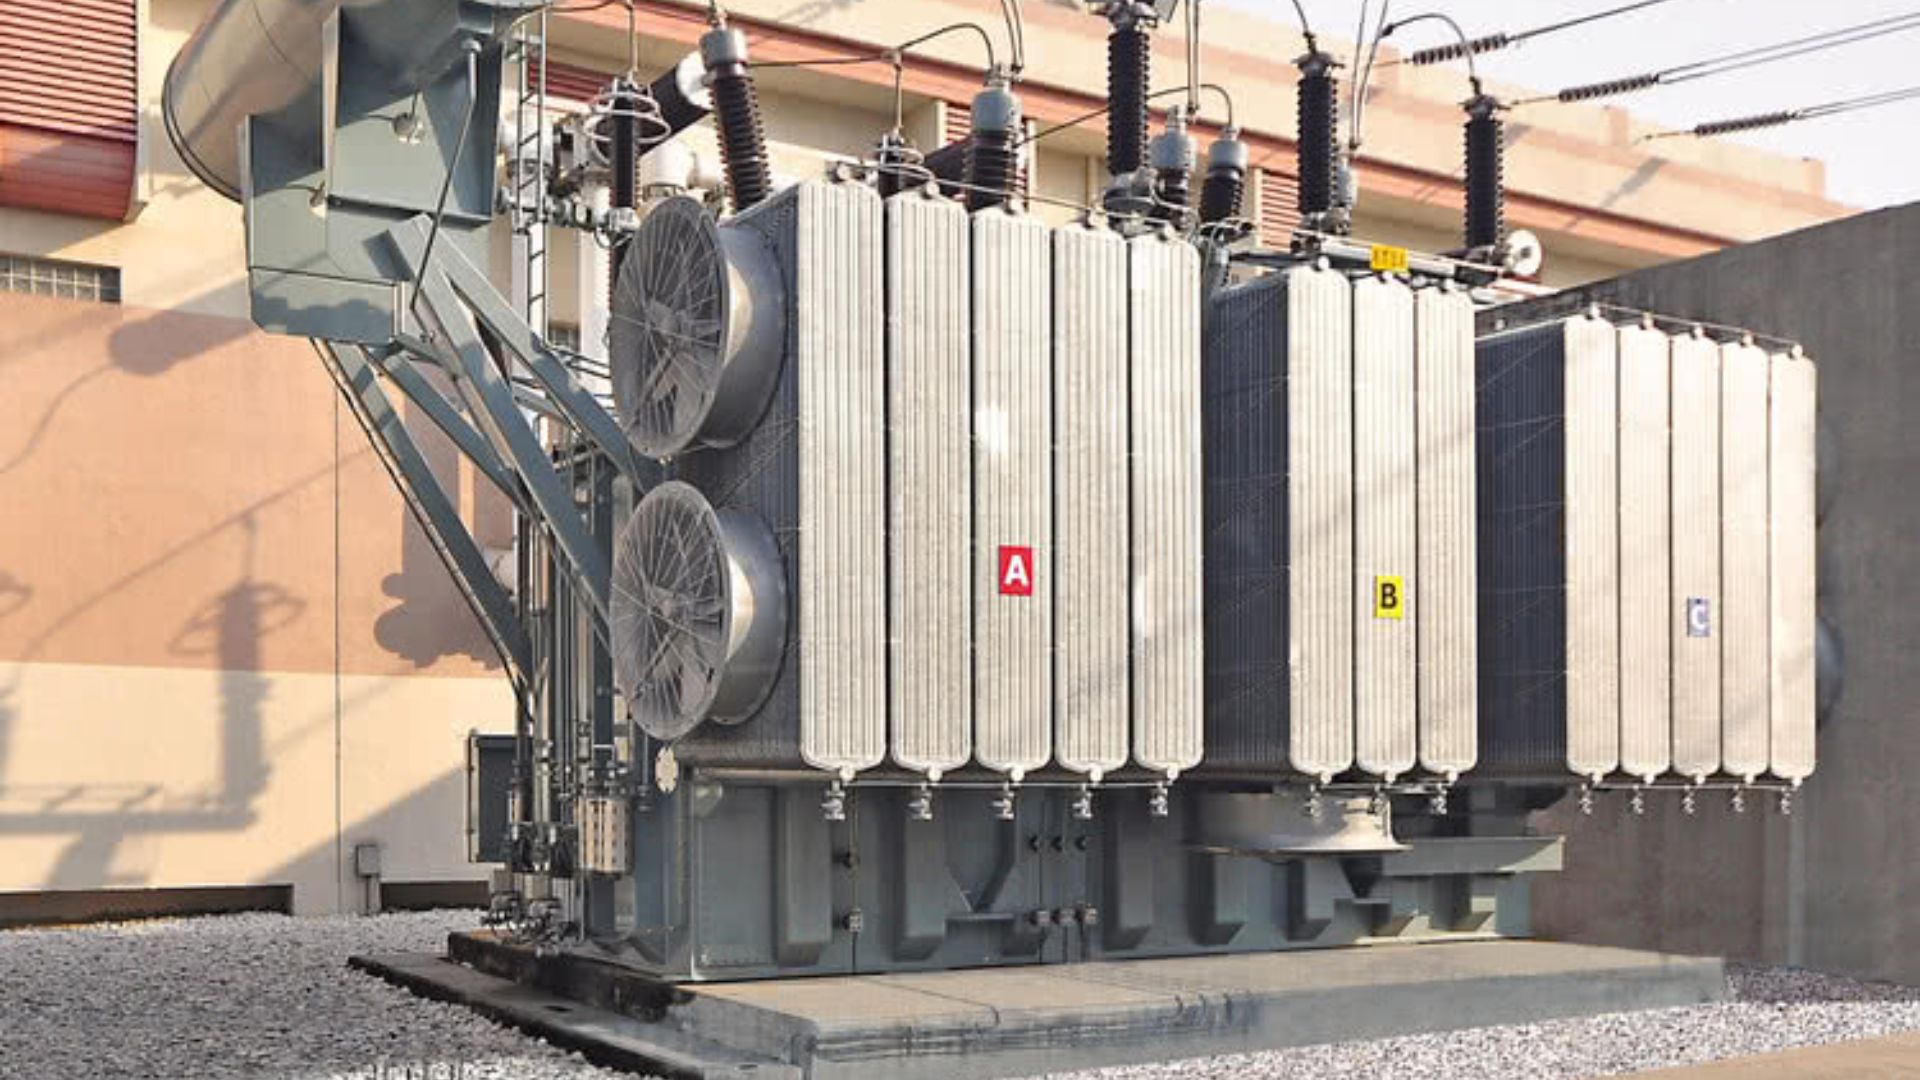 Transformer Suppliers in UAE Bringing to the Table